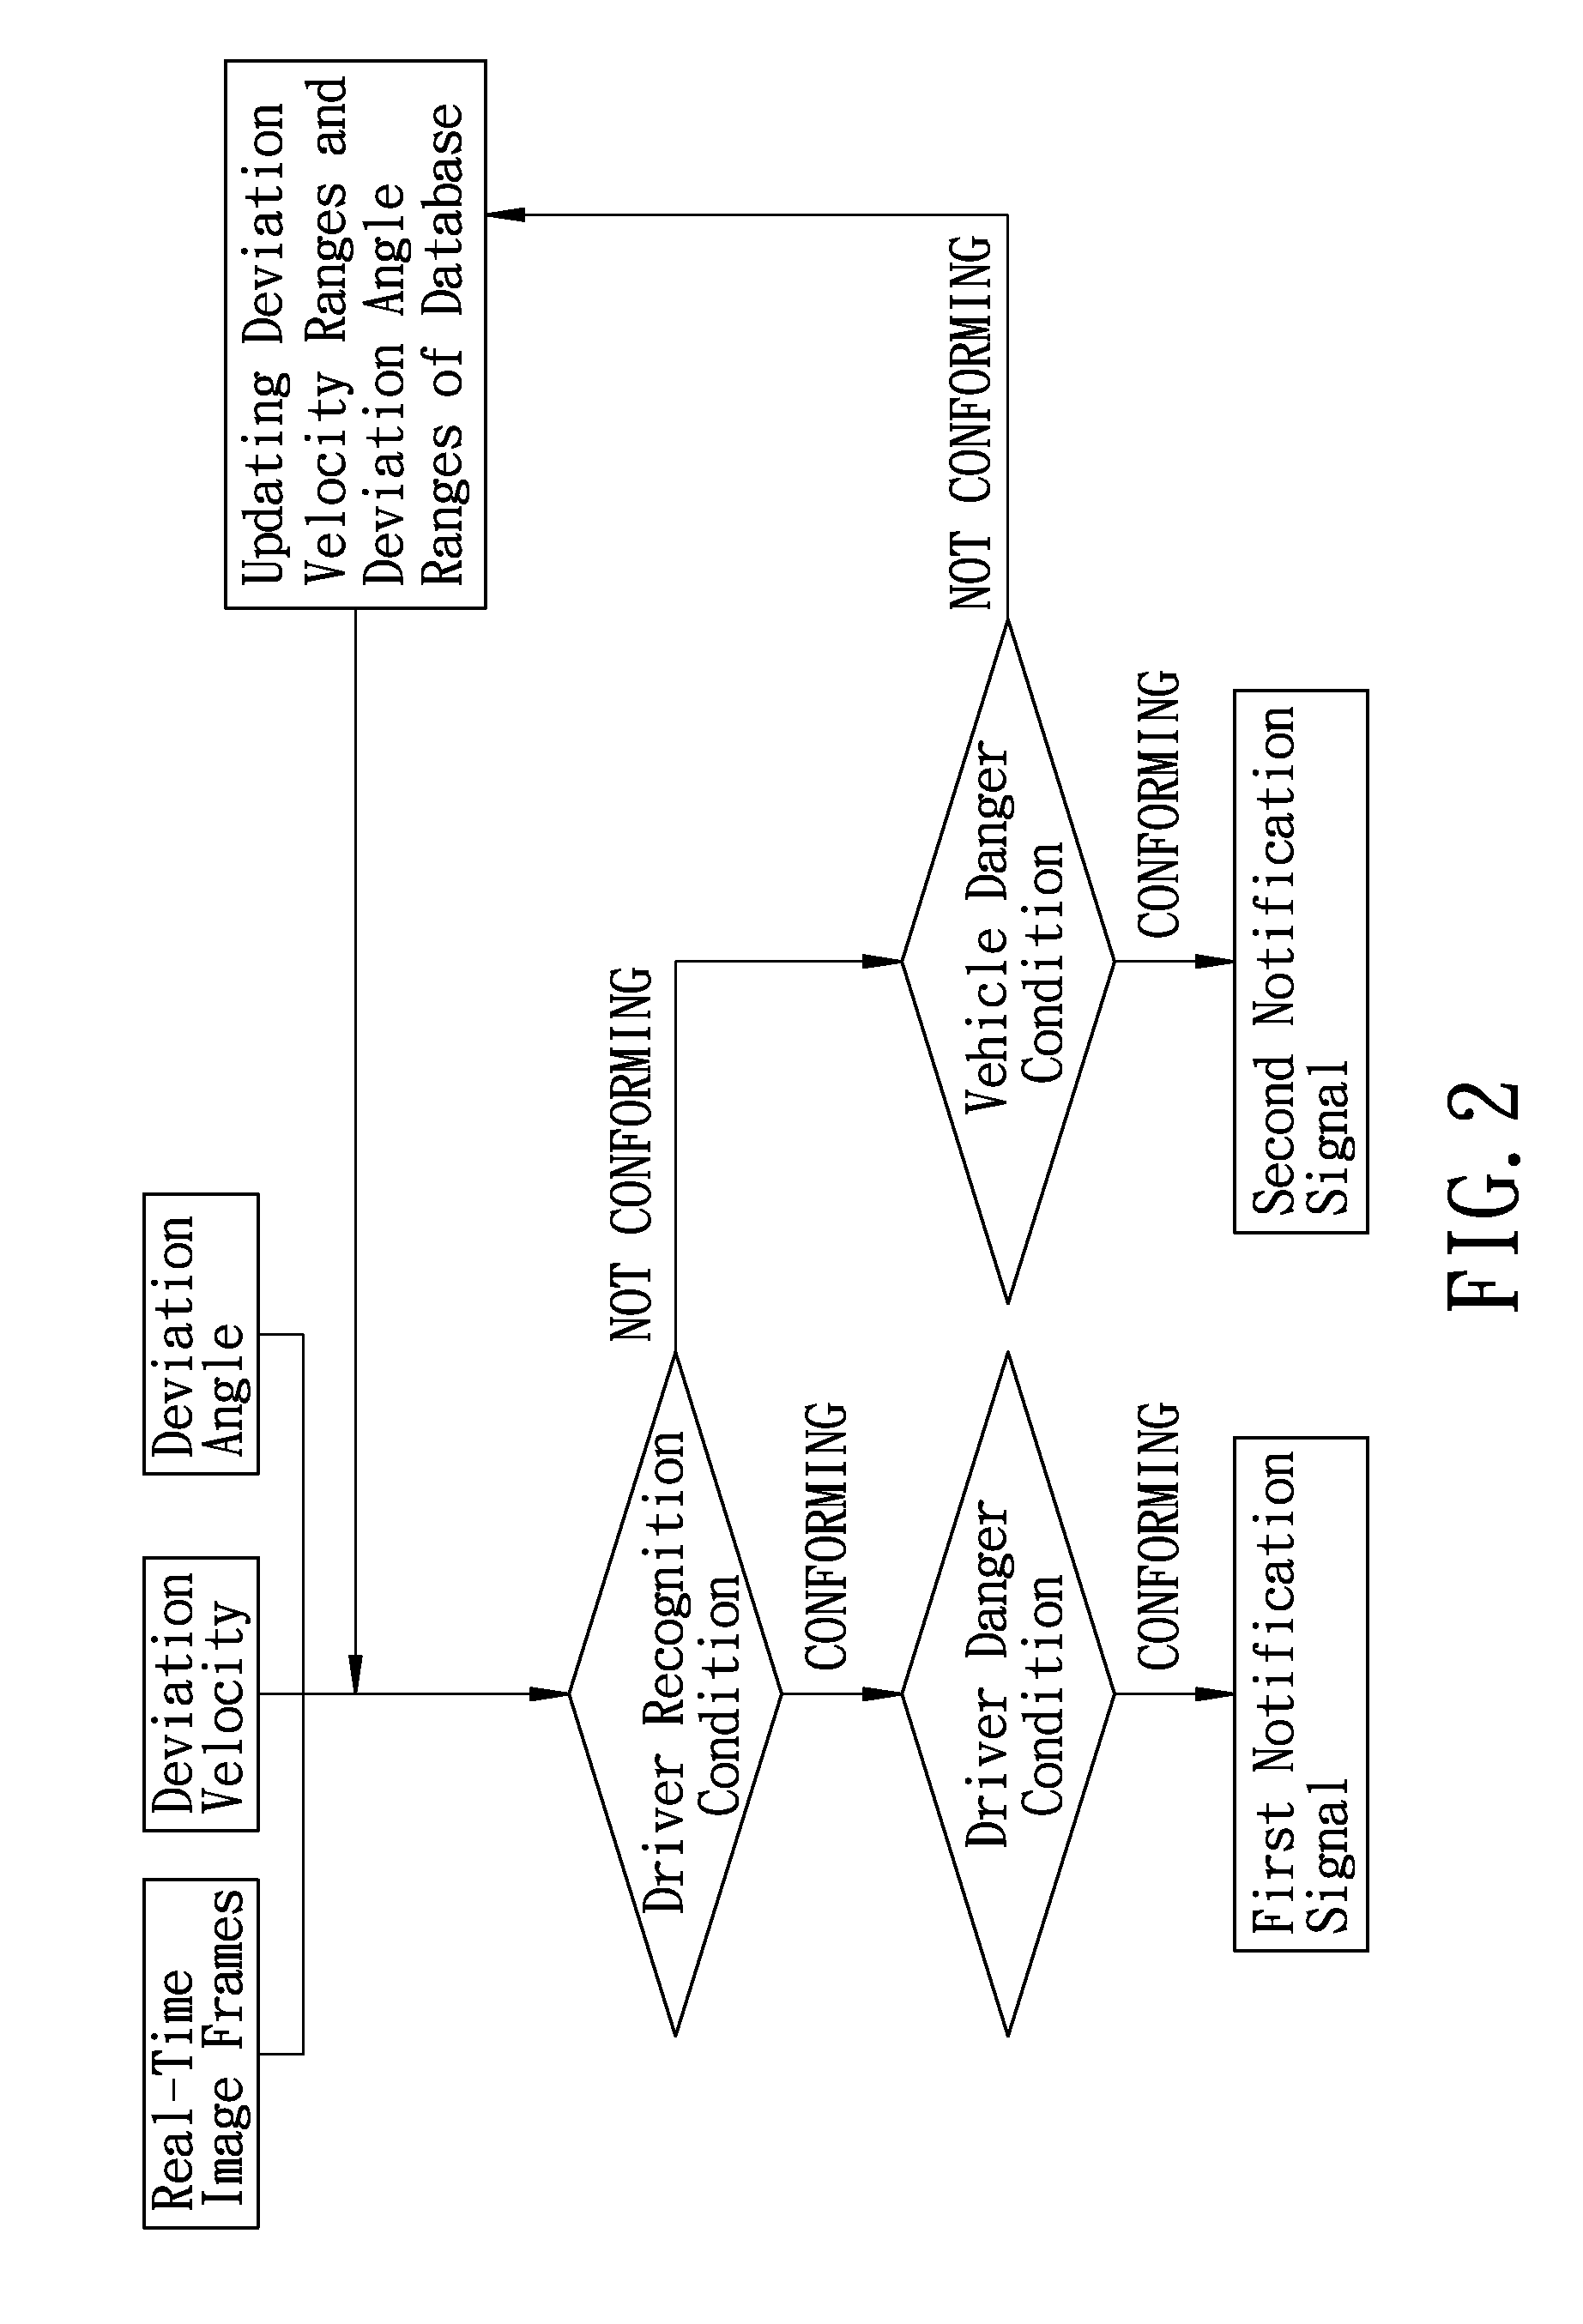 System for detecting vehicle driving state